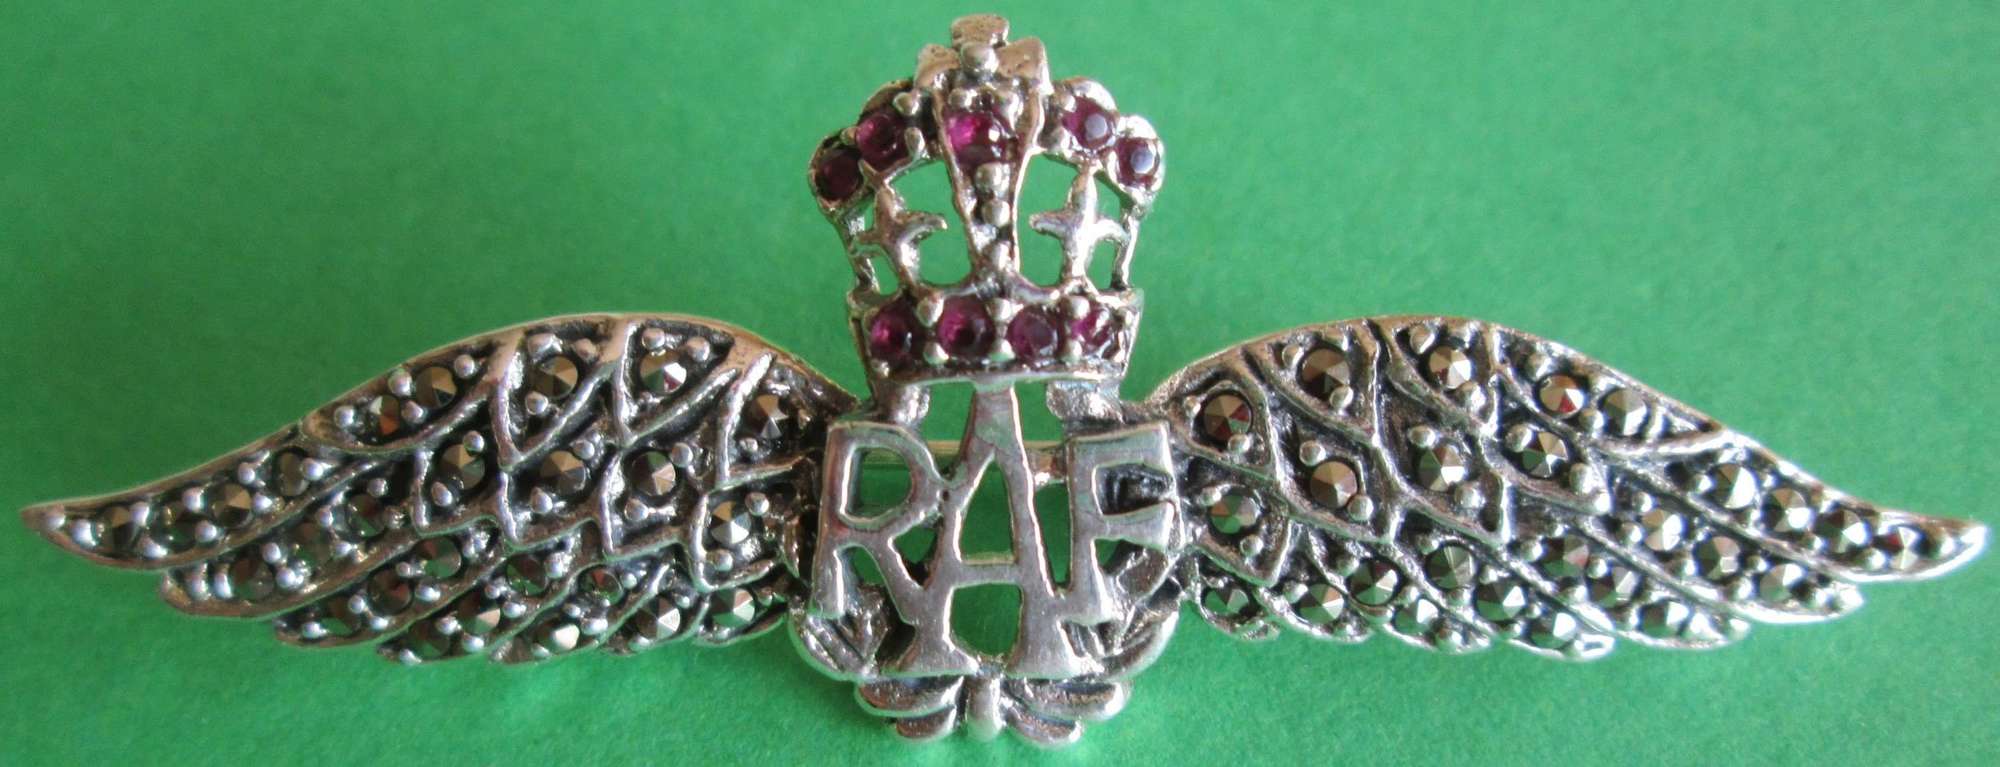 ROYAL AIR FORCE SILVER & MARCASITE SWEETHEART BROOCH